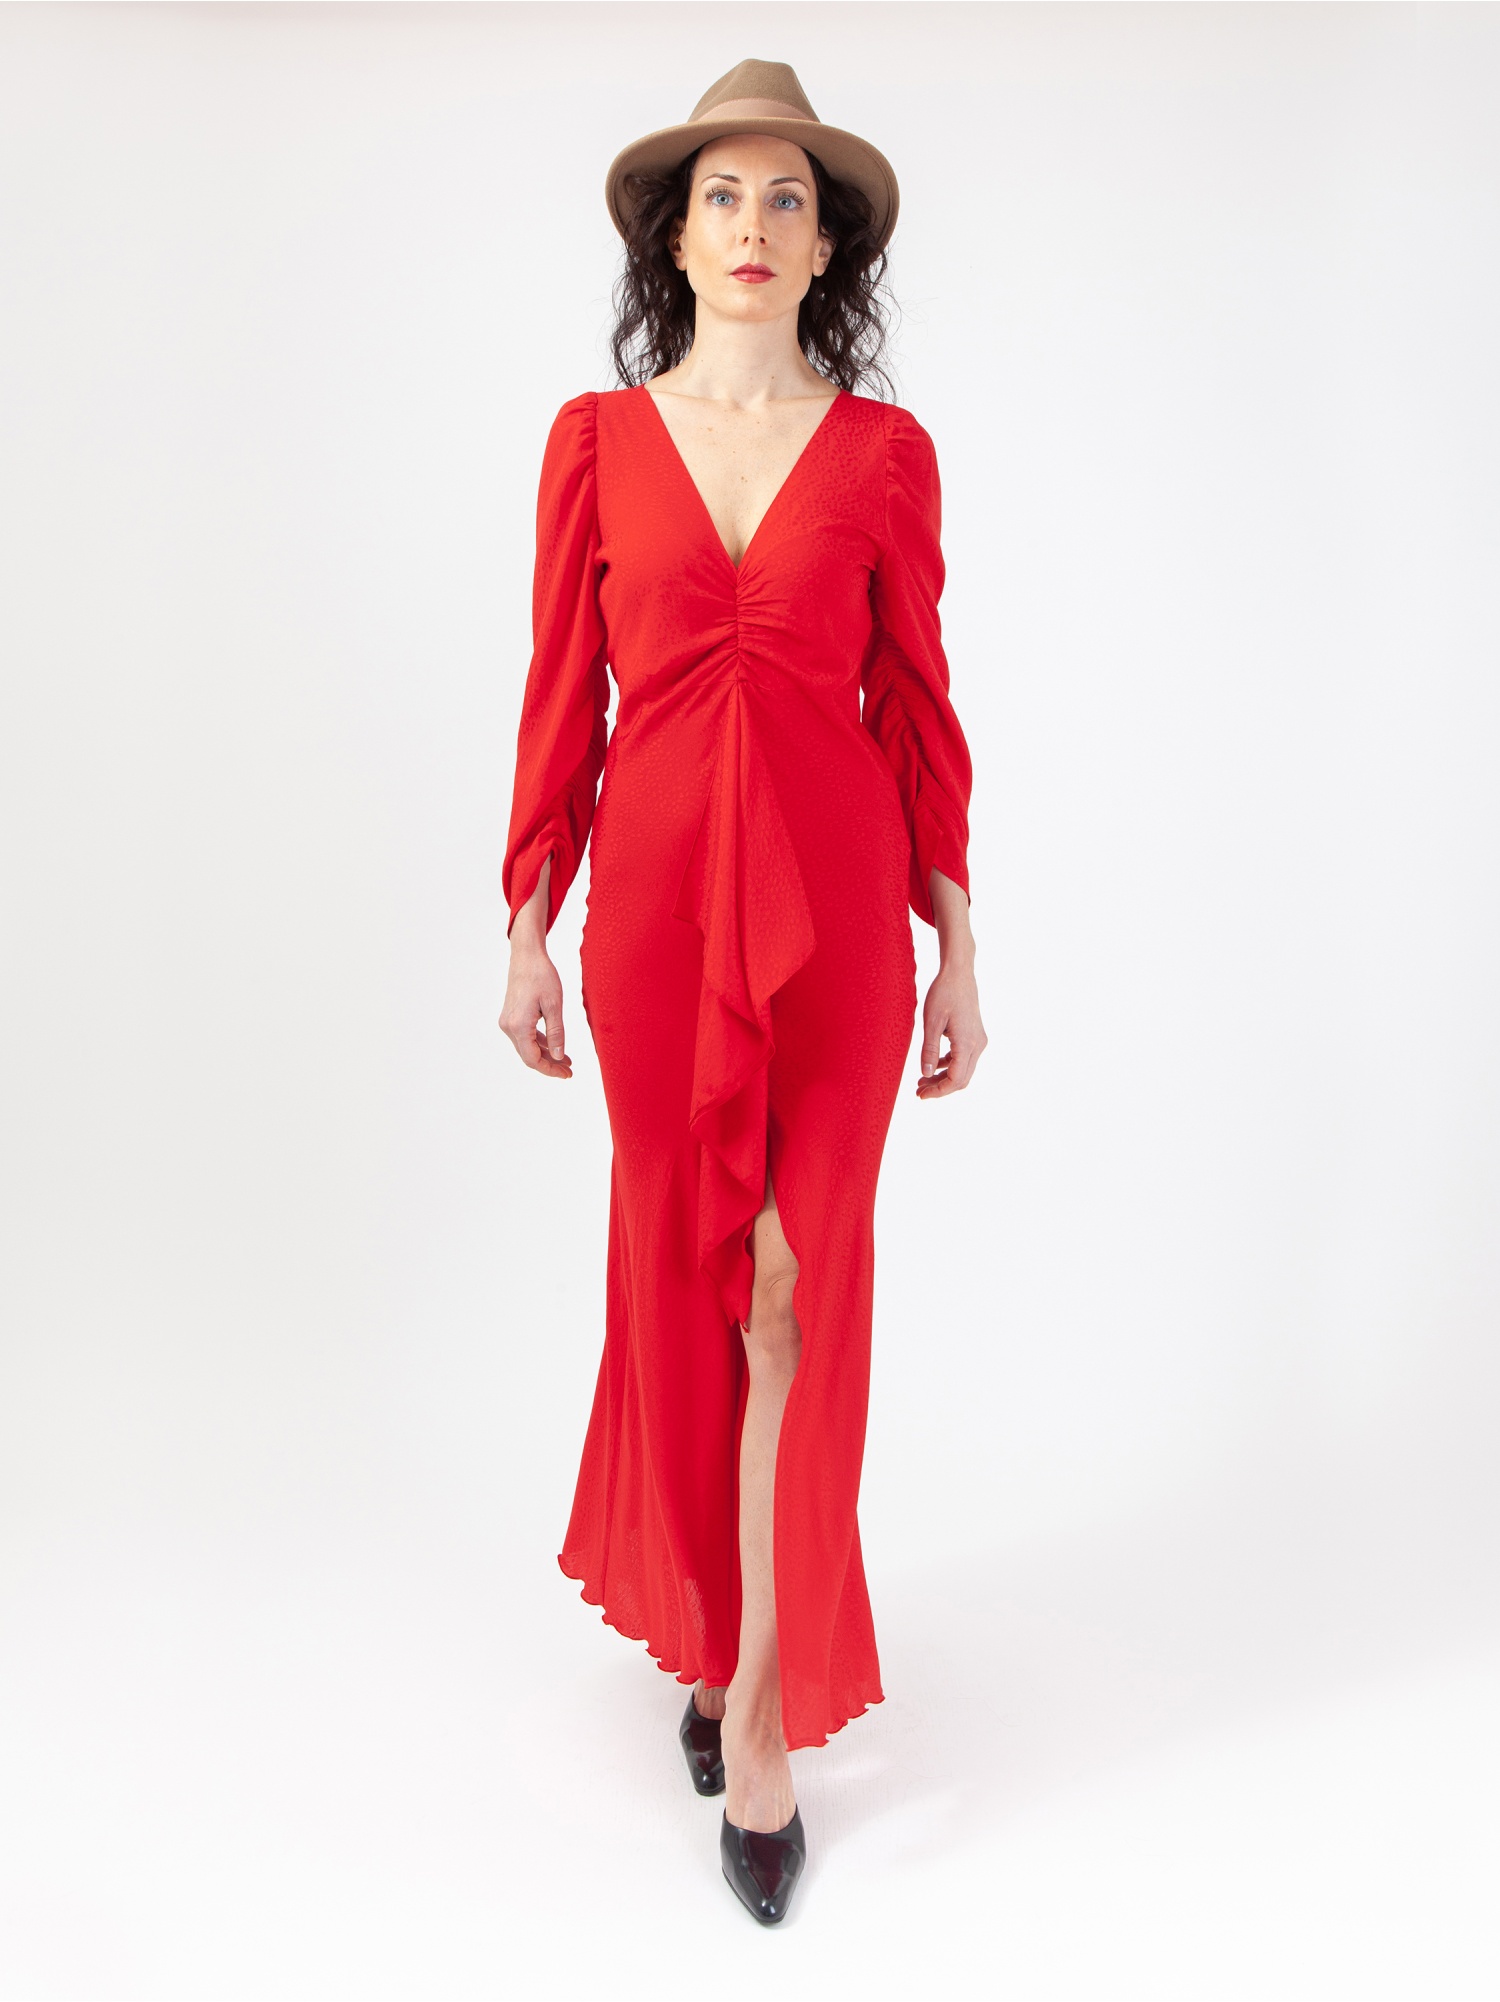 Soft woman dress, red midi dress, with long gathered sleeves and V-neck, laces at the waist and slit. Red color, jacquard fabric. 100% viscose, made in Italy. Buy online!